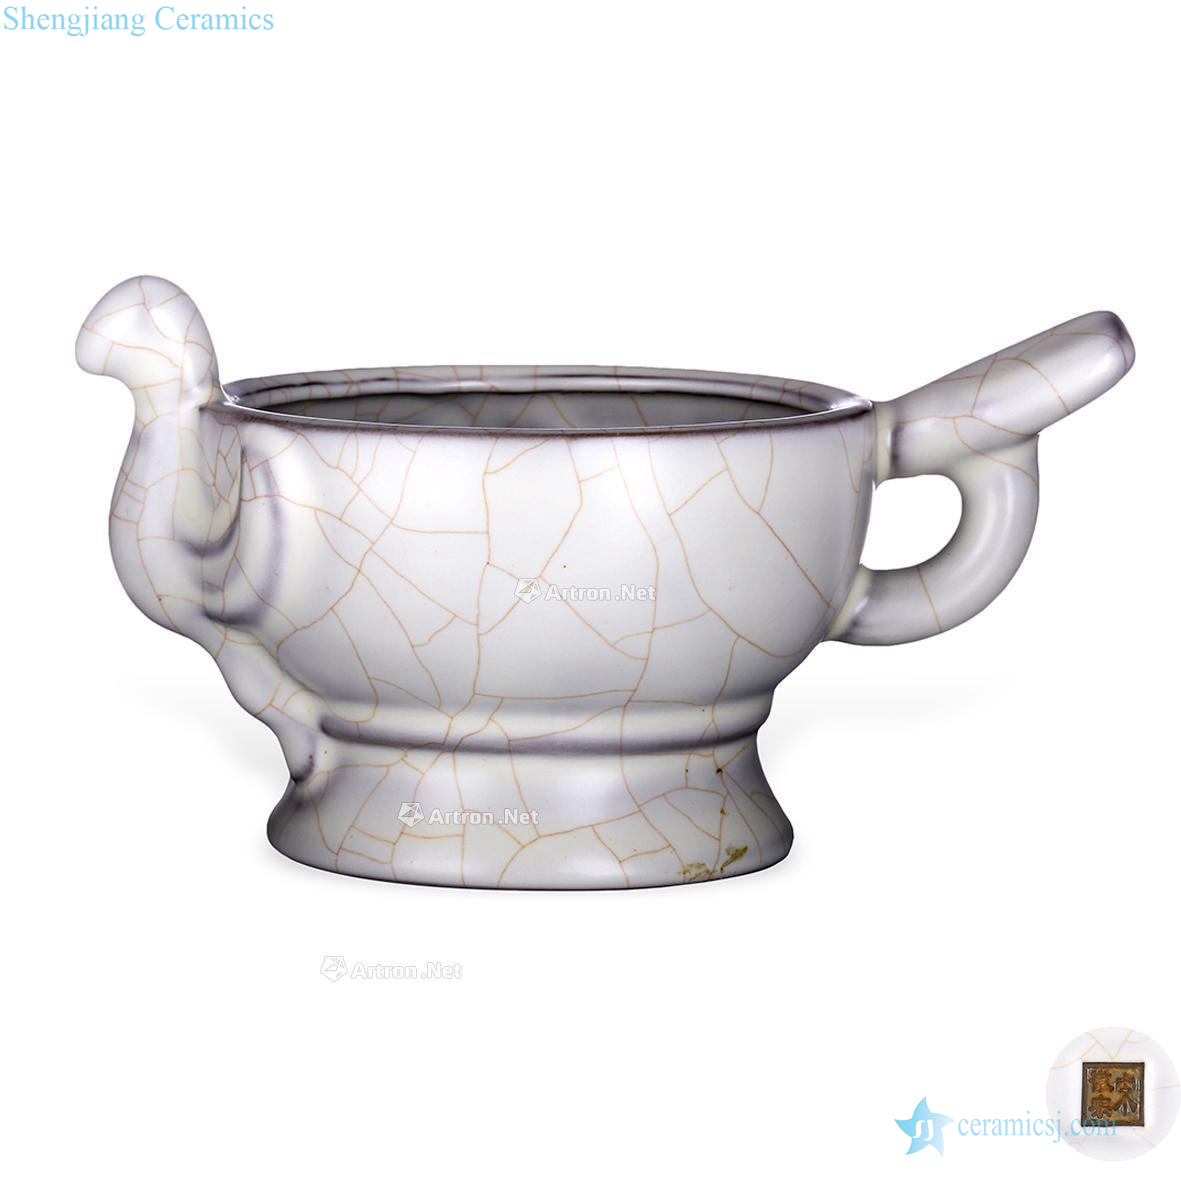 The song dynasty Your kiln white glazed chicken cup